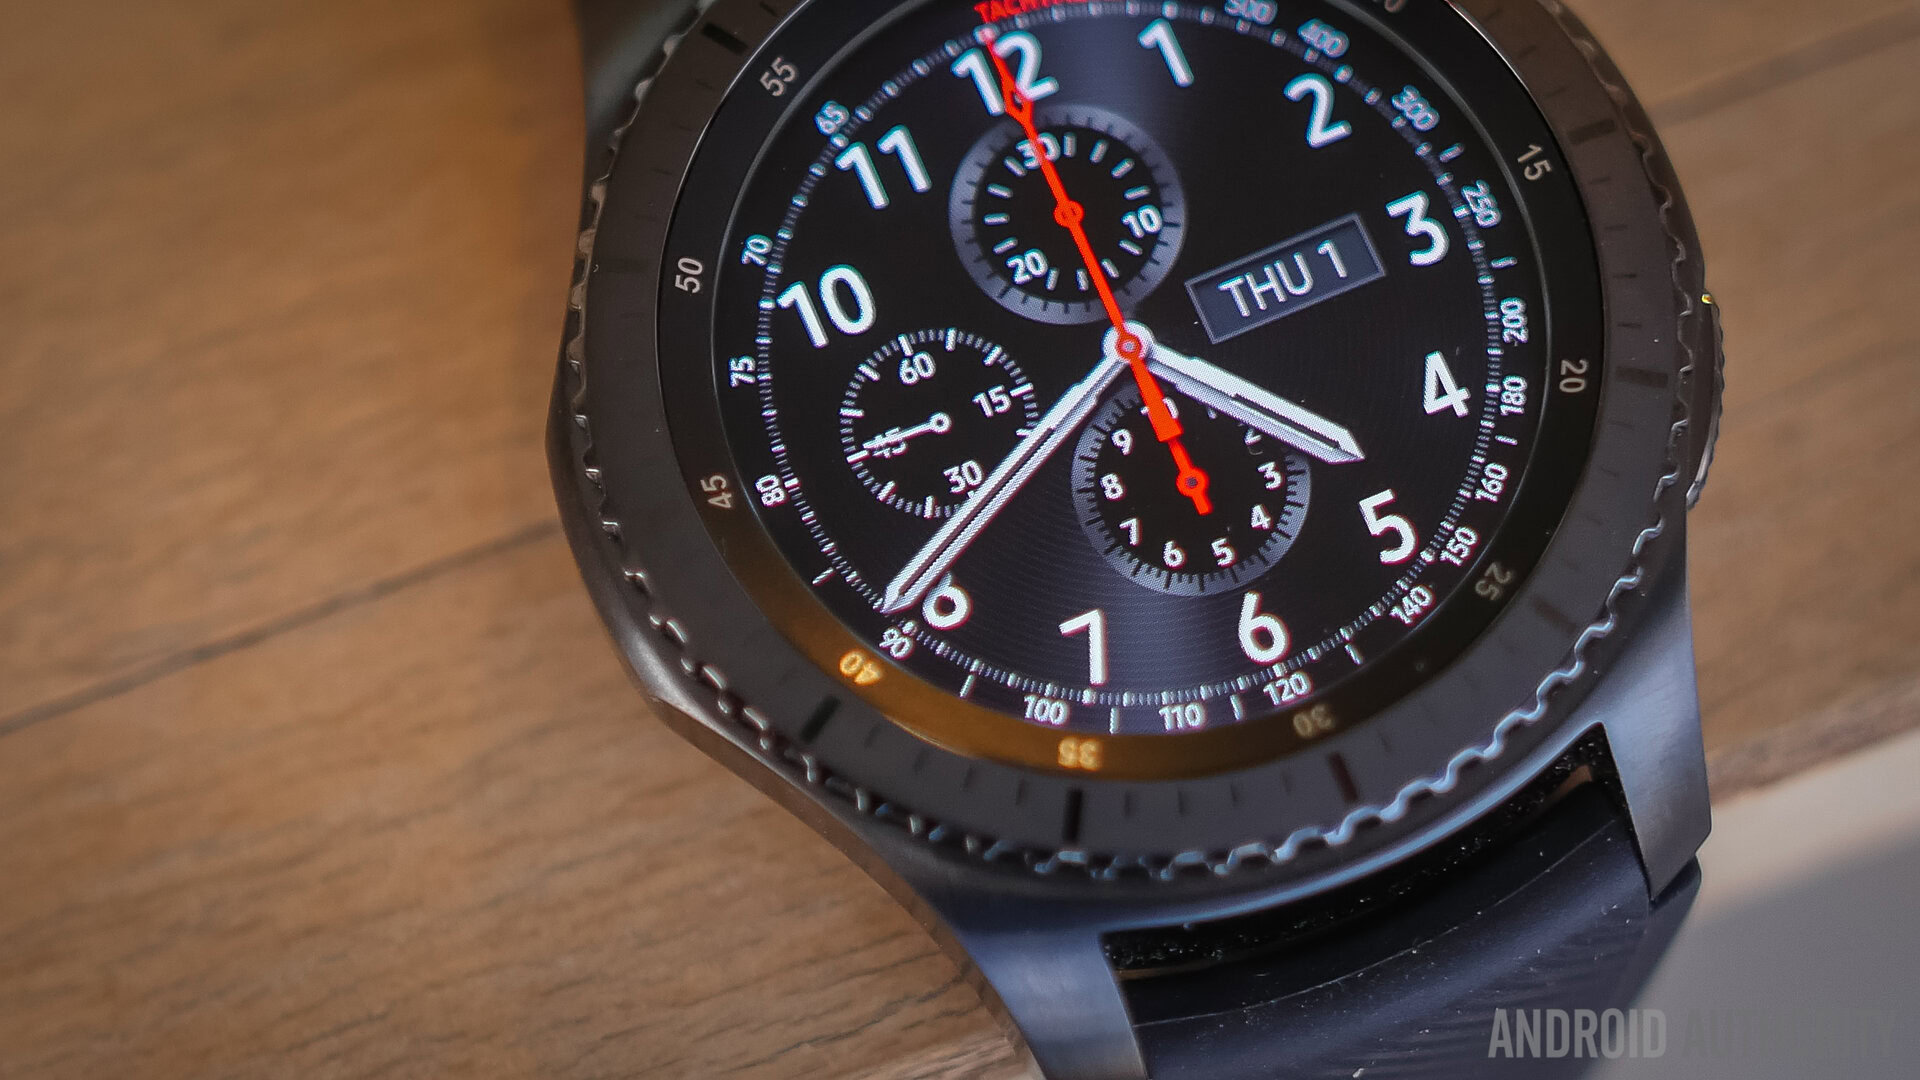 Samsung Gear S3's Value Pack update brings fitness tracking